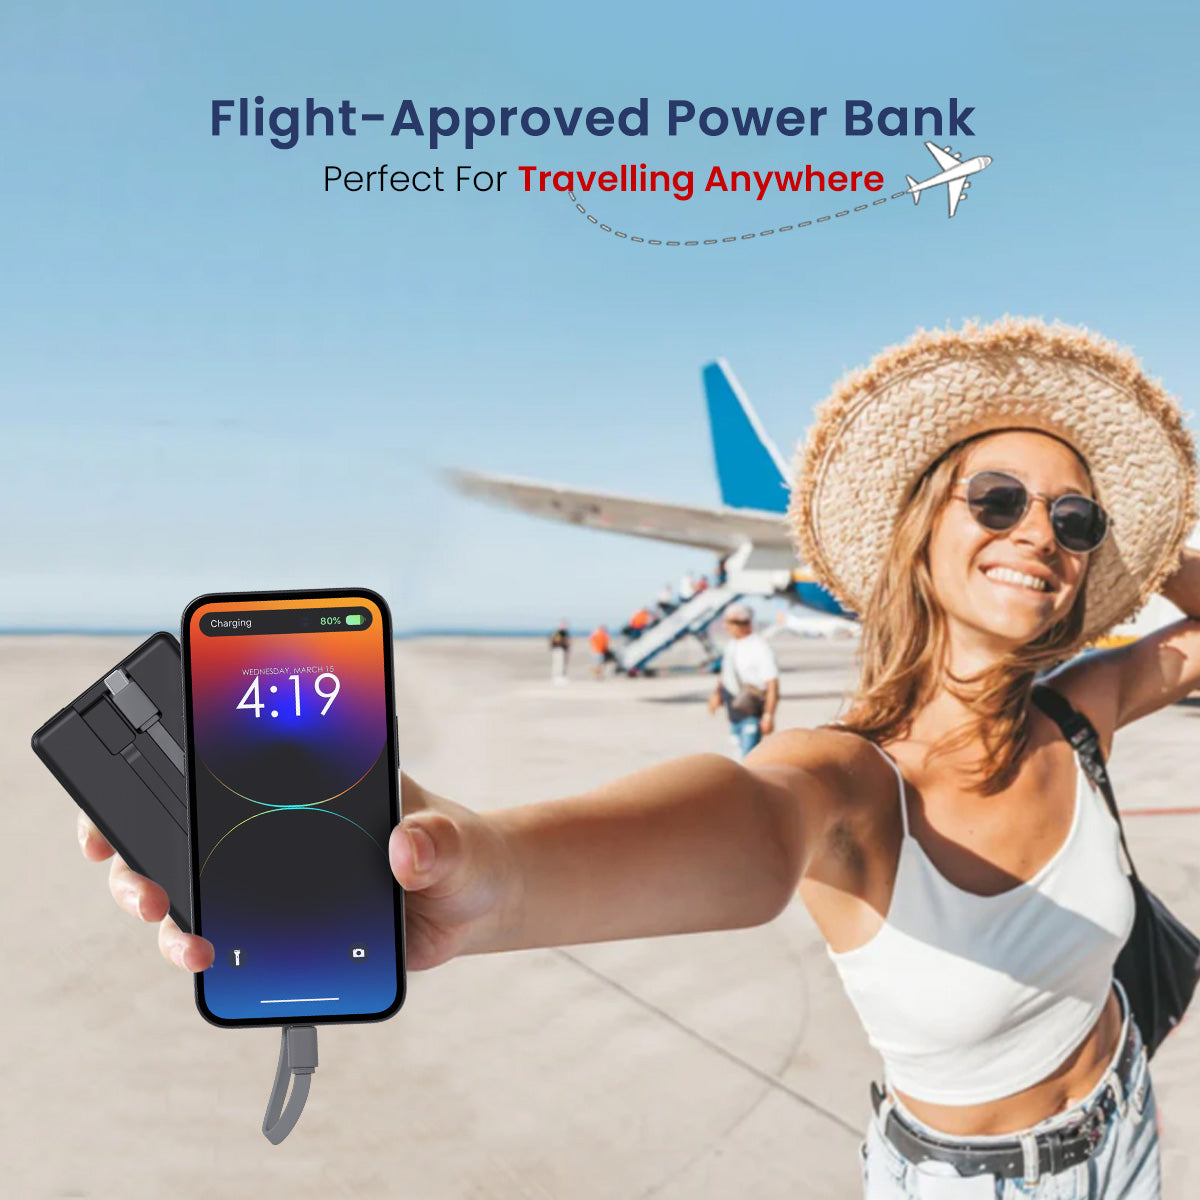  Portronics Luxcell bind 20K 20000mah slimmest Power bank for every day use| travel friendly power bank| durable power bank